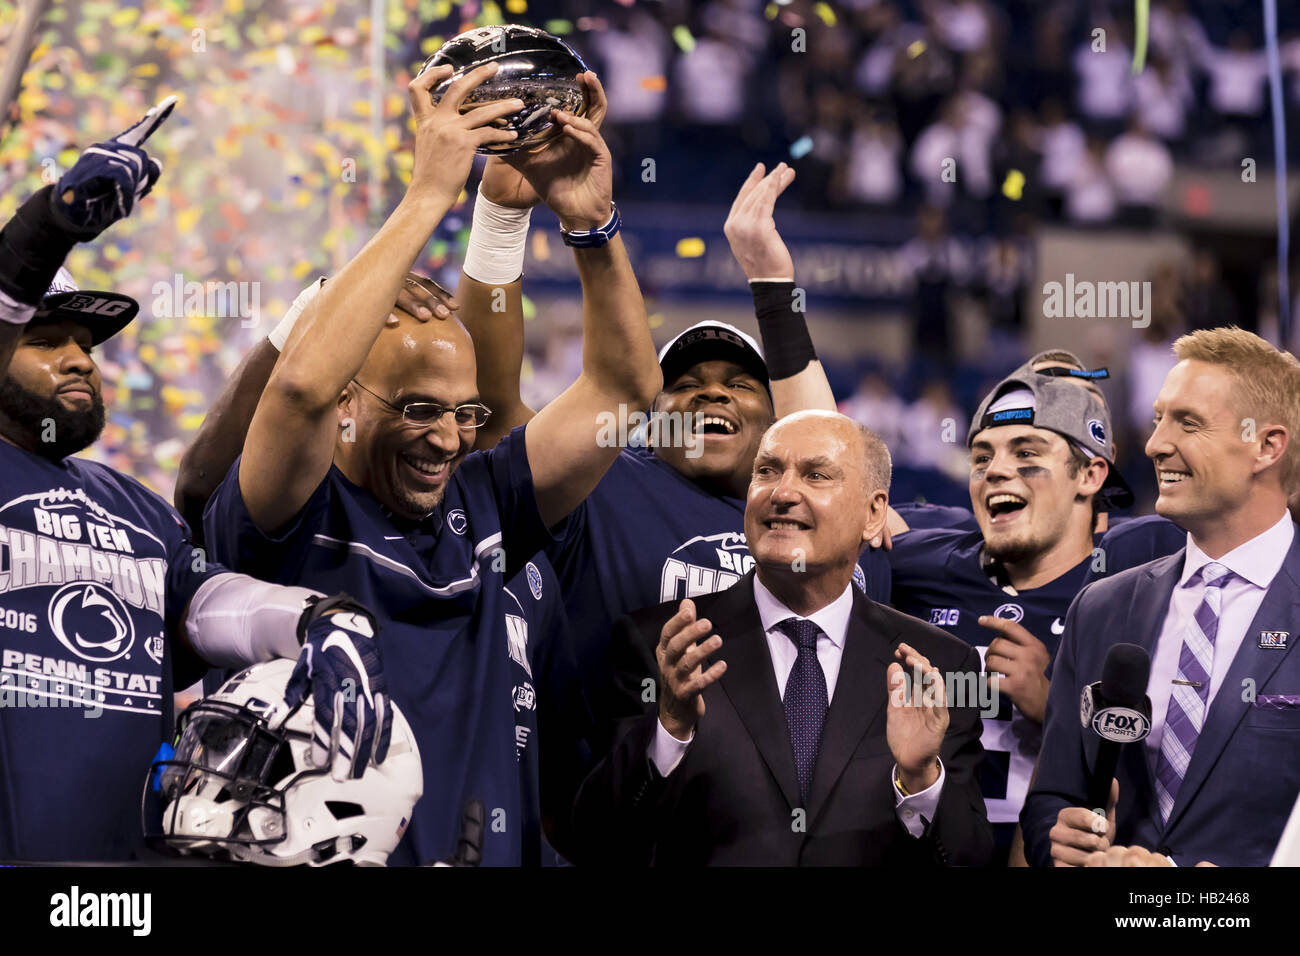 Indianapolis, Indiana, USA. 3rd Dec, 2016. December 3, 2016 - Indianapolis, Indiana - Penn State Nittany Lions head coach James Franklin and Penn State celebrates after the Big Ten Championship game between Penn State Nittany Lions and Wisconsin Badgers at Lucas Oil Stadium. Penn State won 38-31. © Scott Taetsch/ZUMA Wire/Alamy Live News Stock Photo